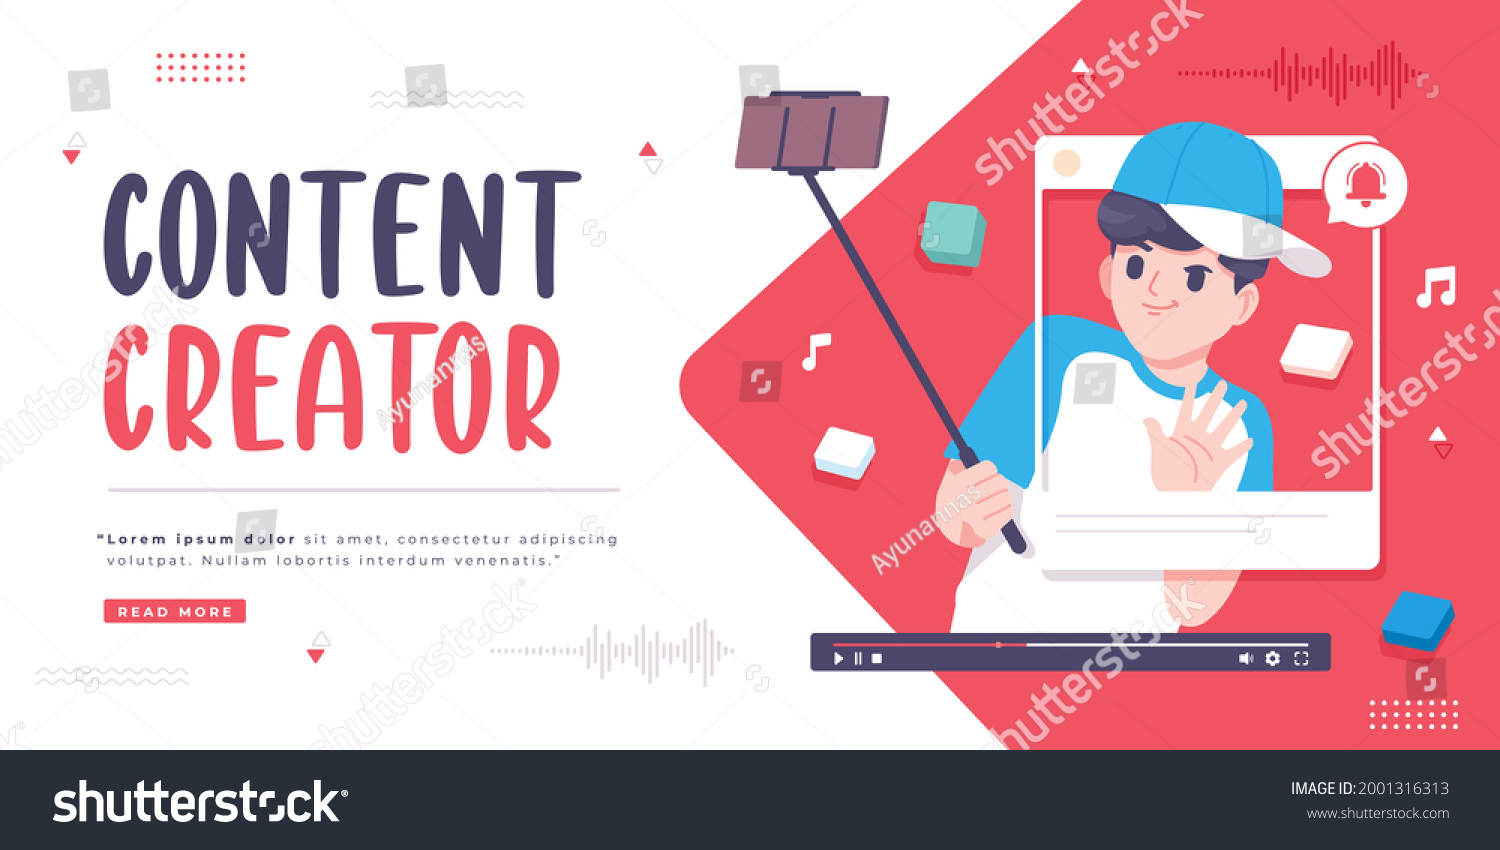 Content Creator Concept Banner Template Stock Vector (Royalty Free